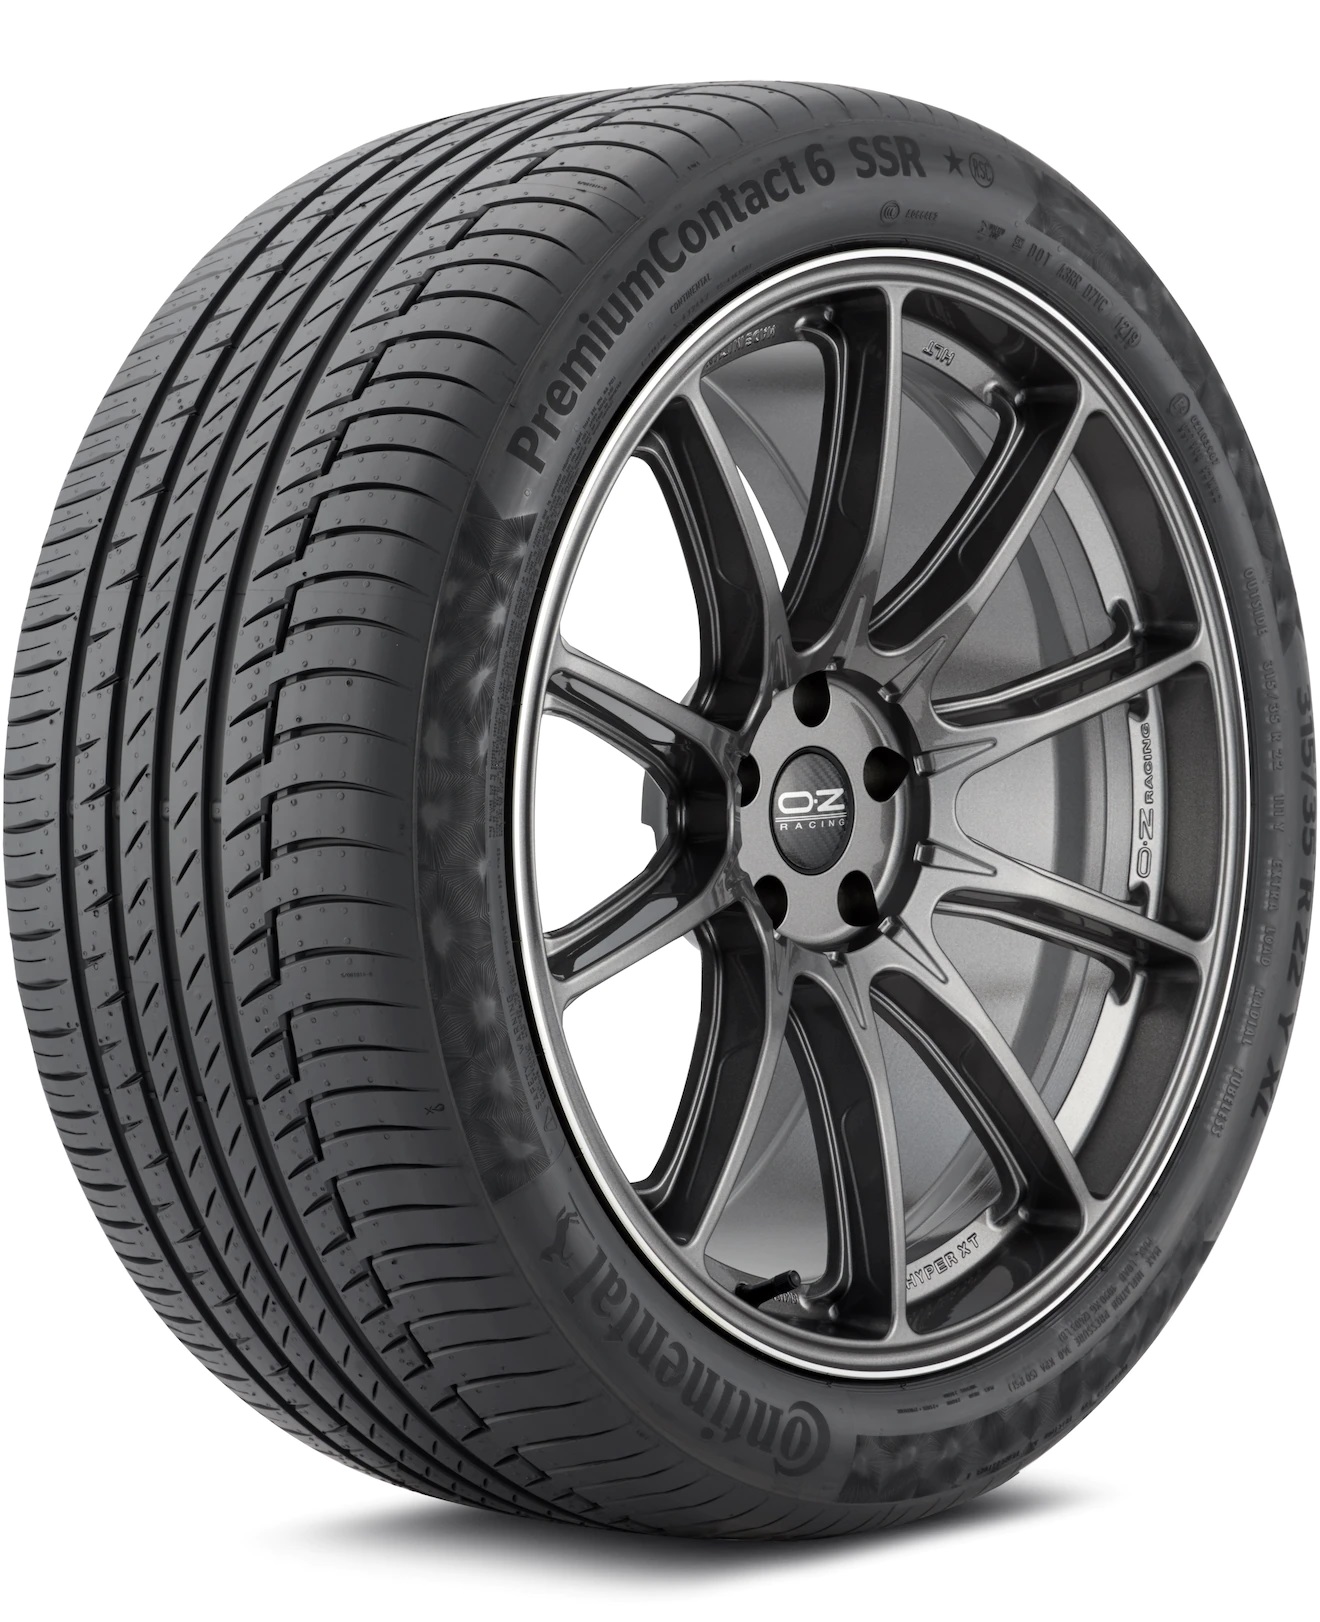 Continental PremiumContact 6 ContiSilent 325/40 R22 114Y MO-S FP